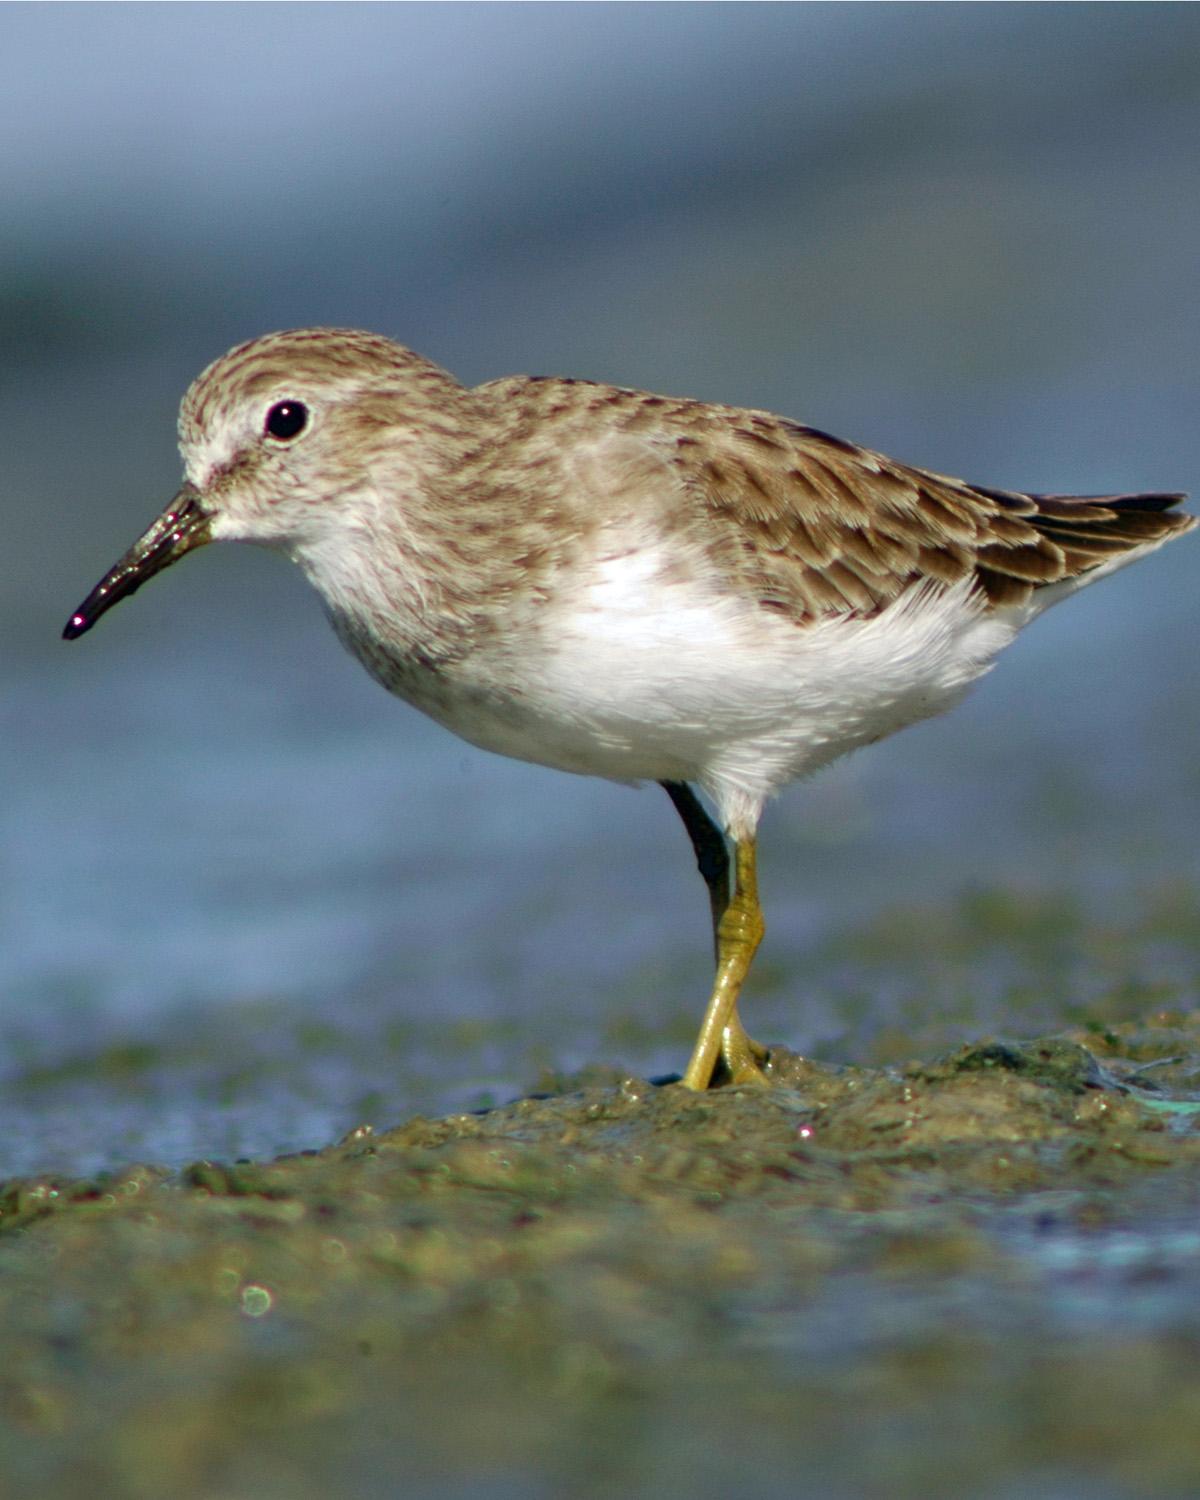 Least Sandpiper Photo by Magill Weber